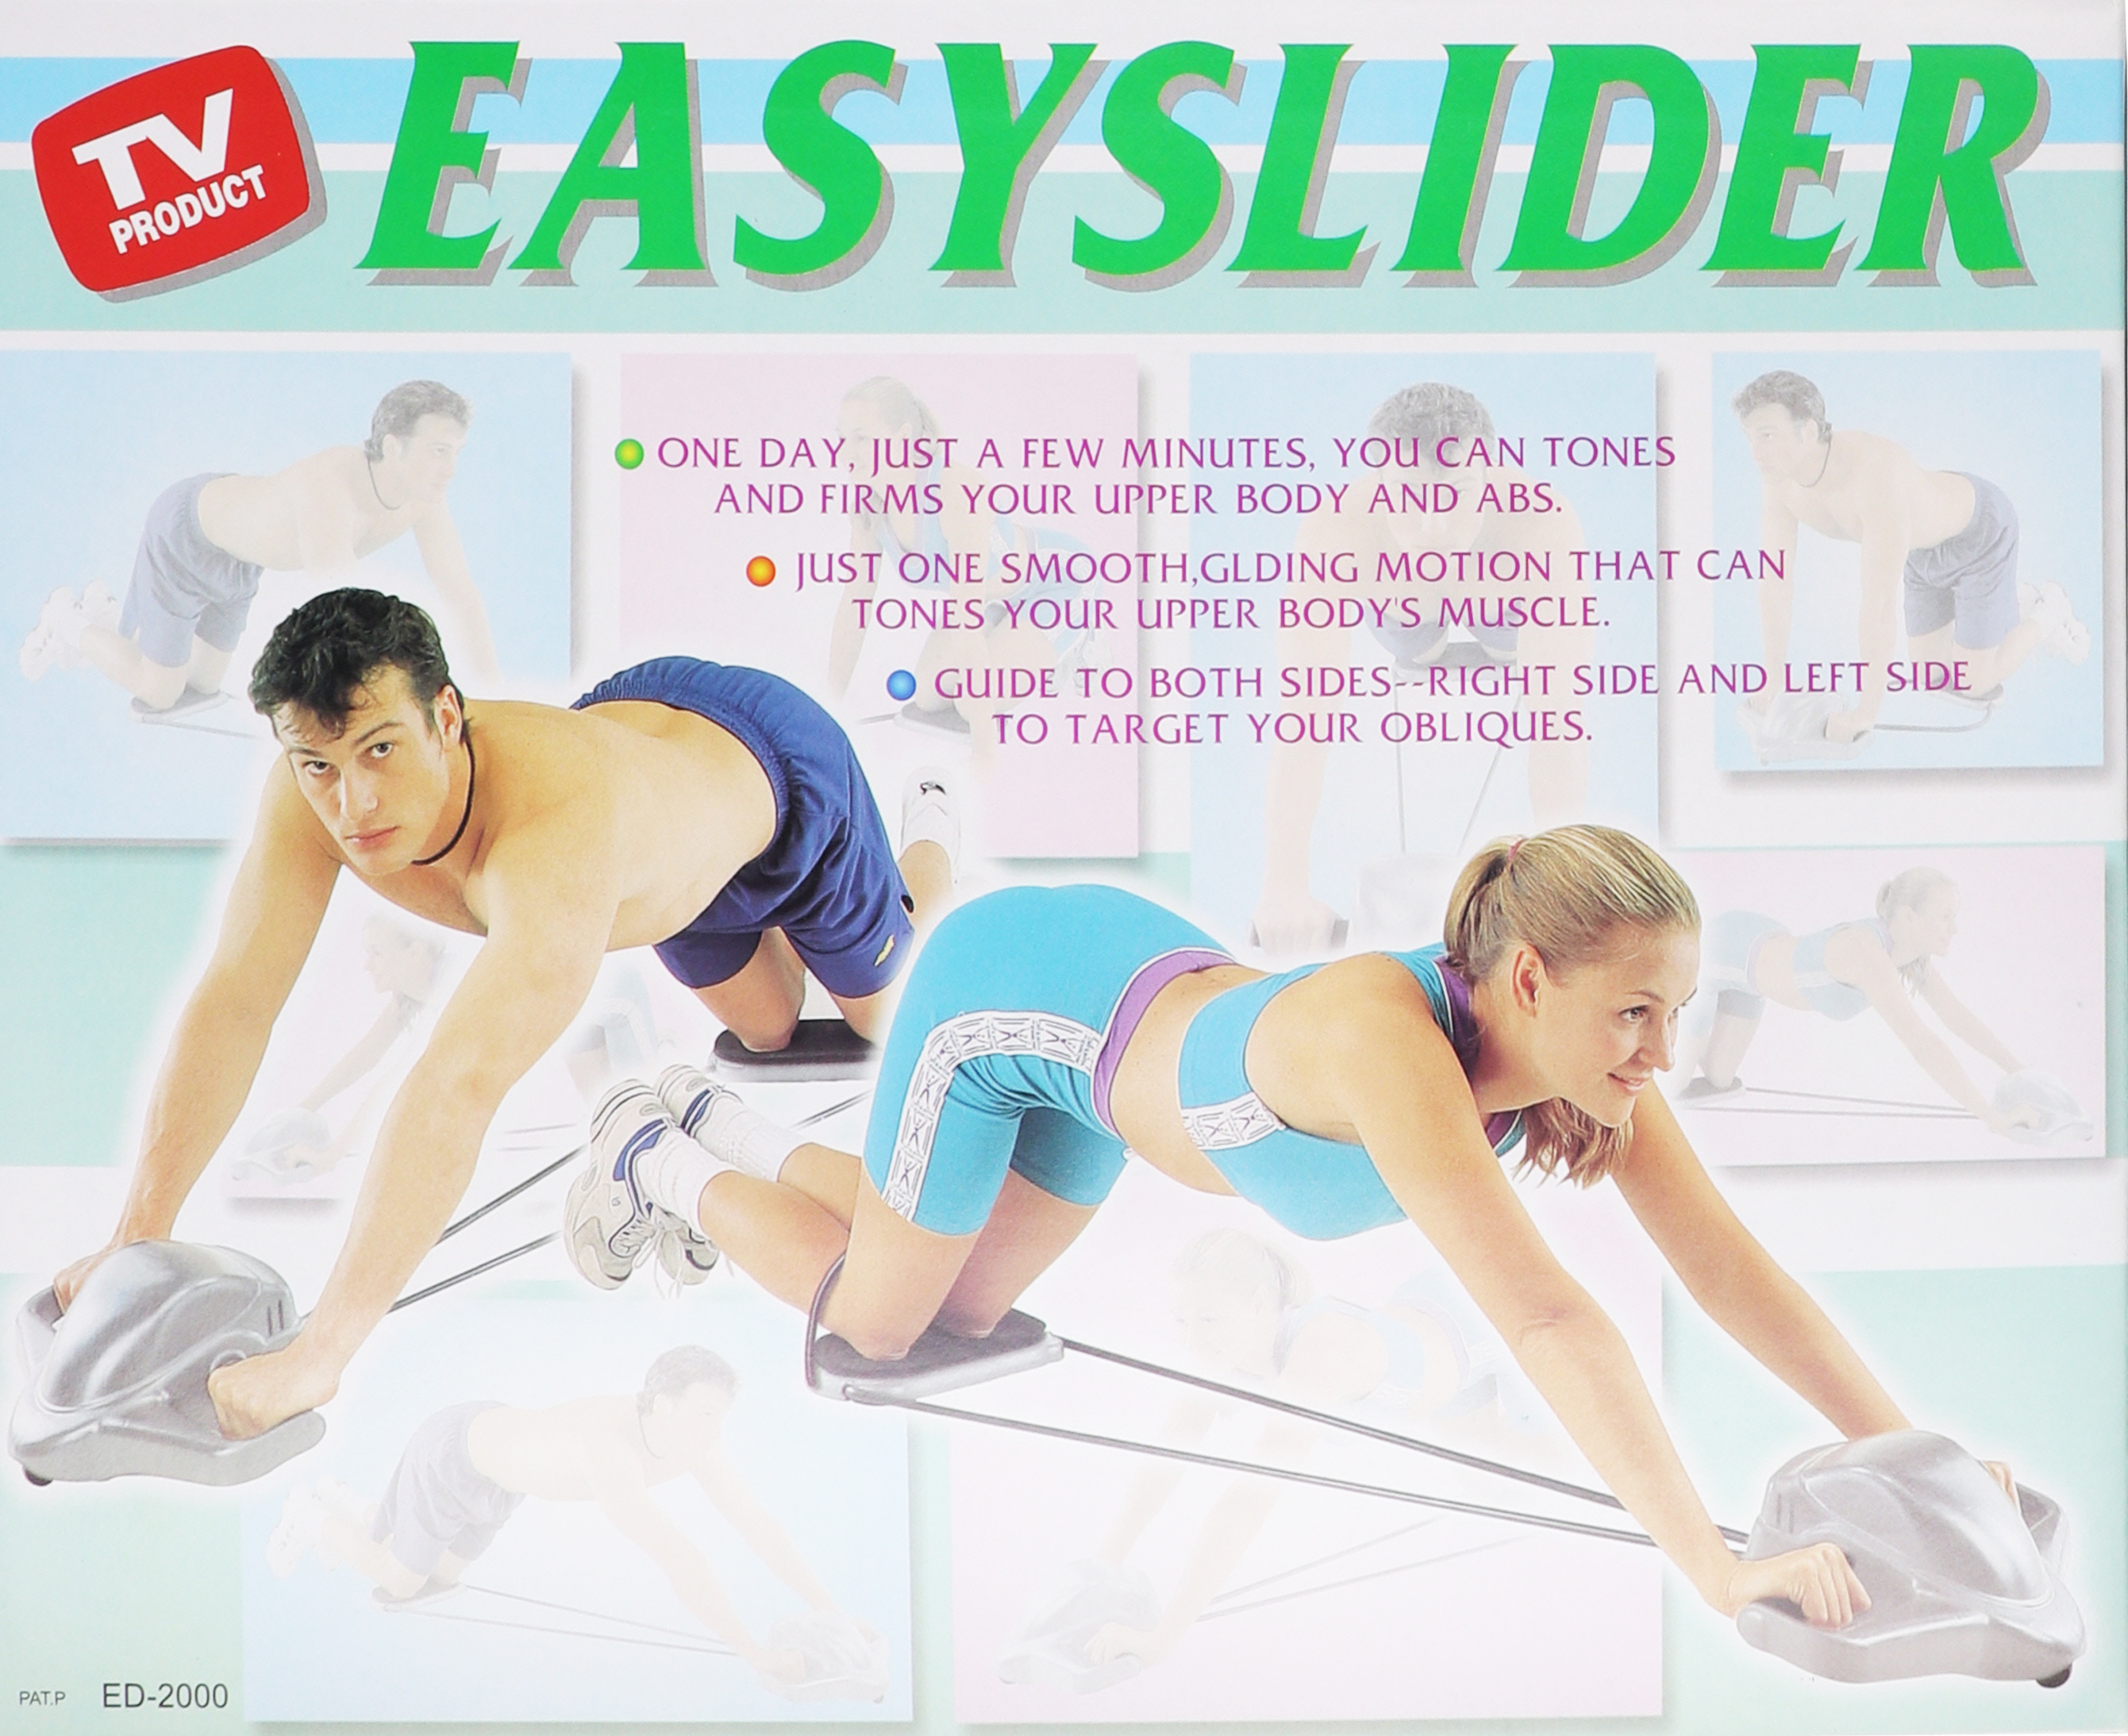 Easy Slider- AB Deluxe Roller- Compete Upper Body Workout Kit